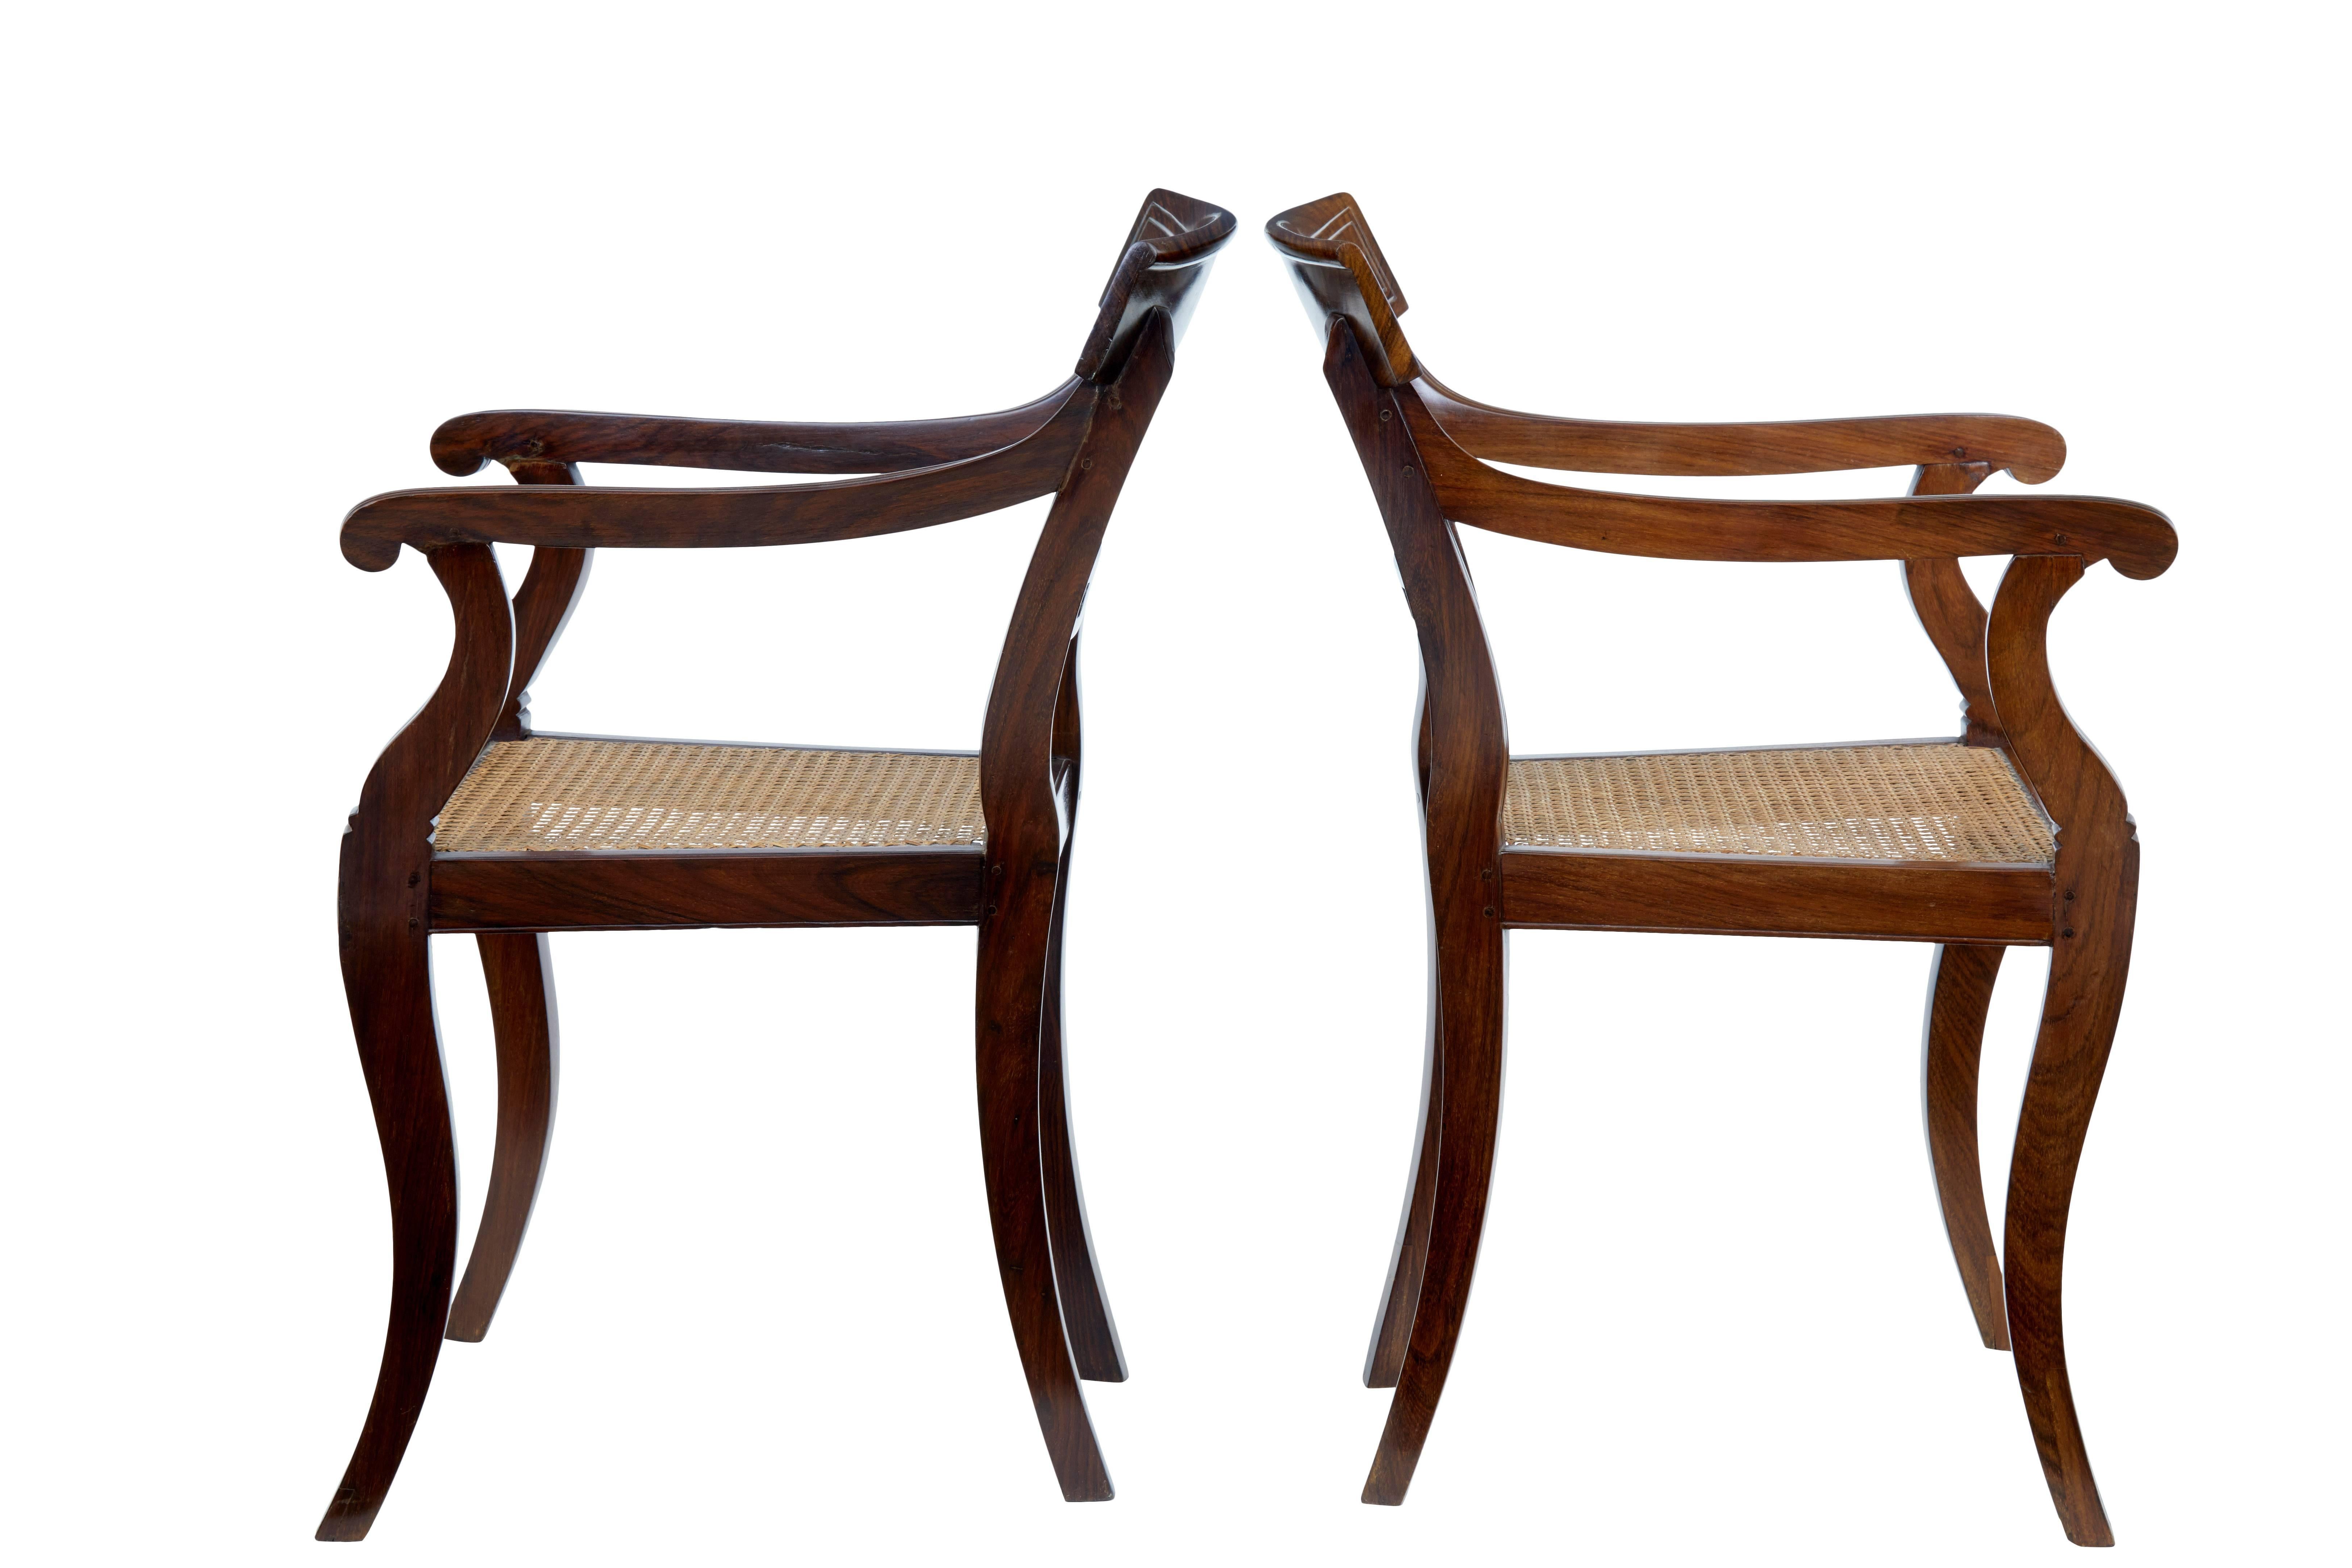 Fine pair of Chinese export armchairs, circa 1820.

Made in the Regency style for the export market. Solid Huanghuali wood. Reference to these chairs can be found in the book The China Trade, page 251, plate 134 by Carl L Crossman.

1 inch